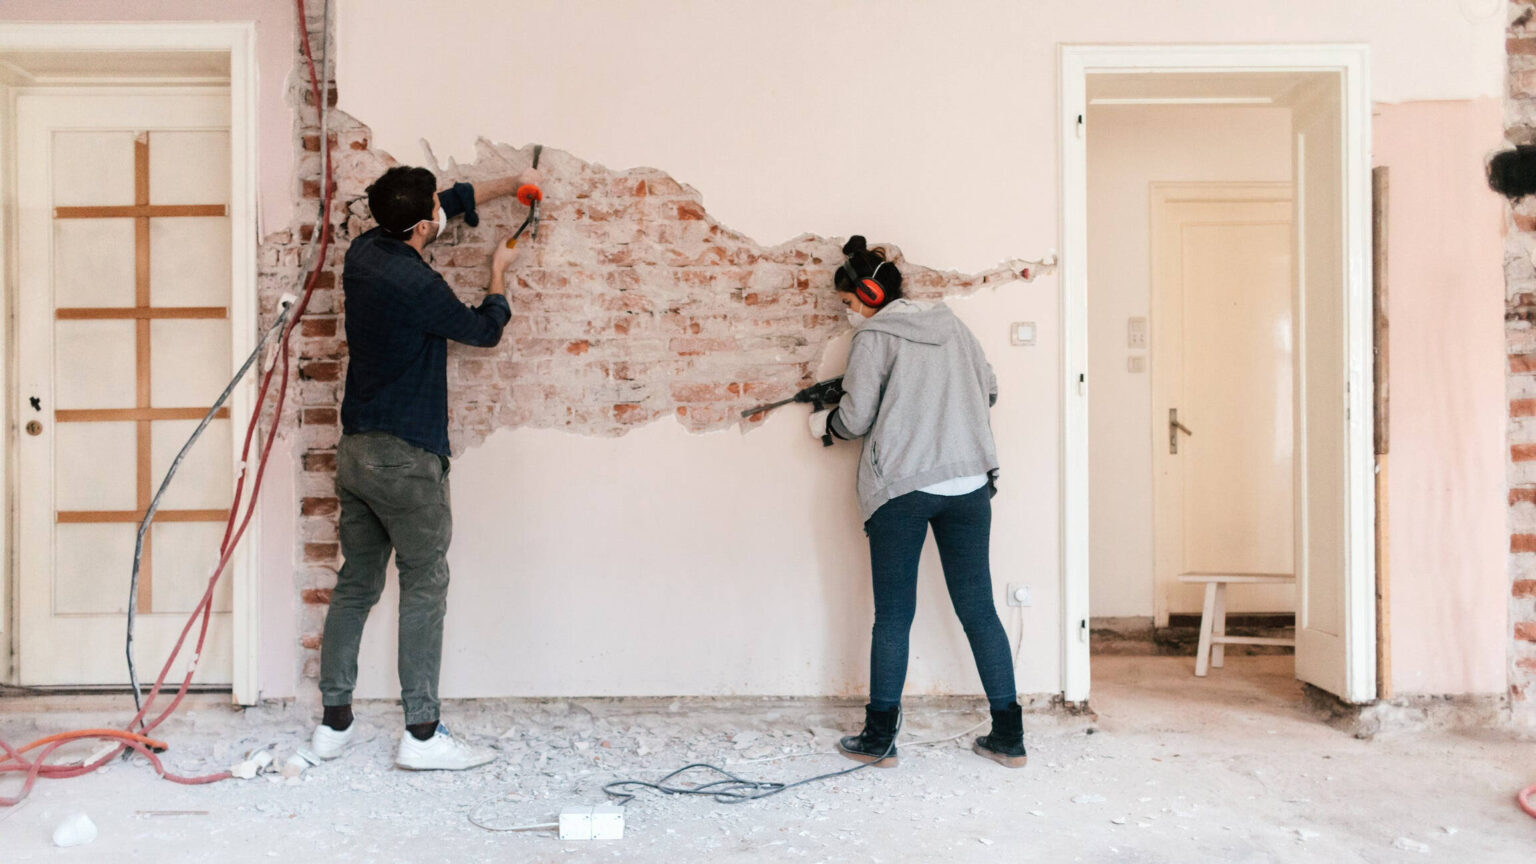 DIY home repair can seem daunting, but with a little help from a professional or a guide, it's possible. Find what projects work for you here!